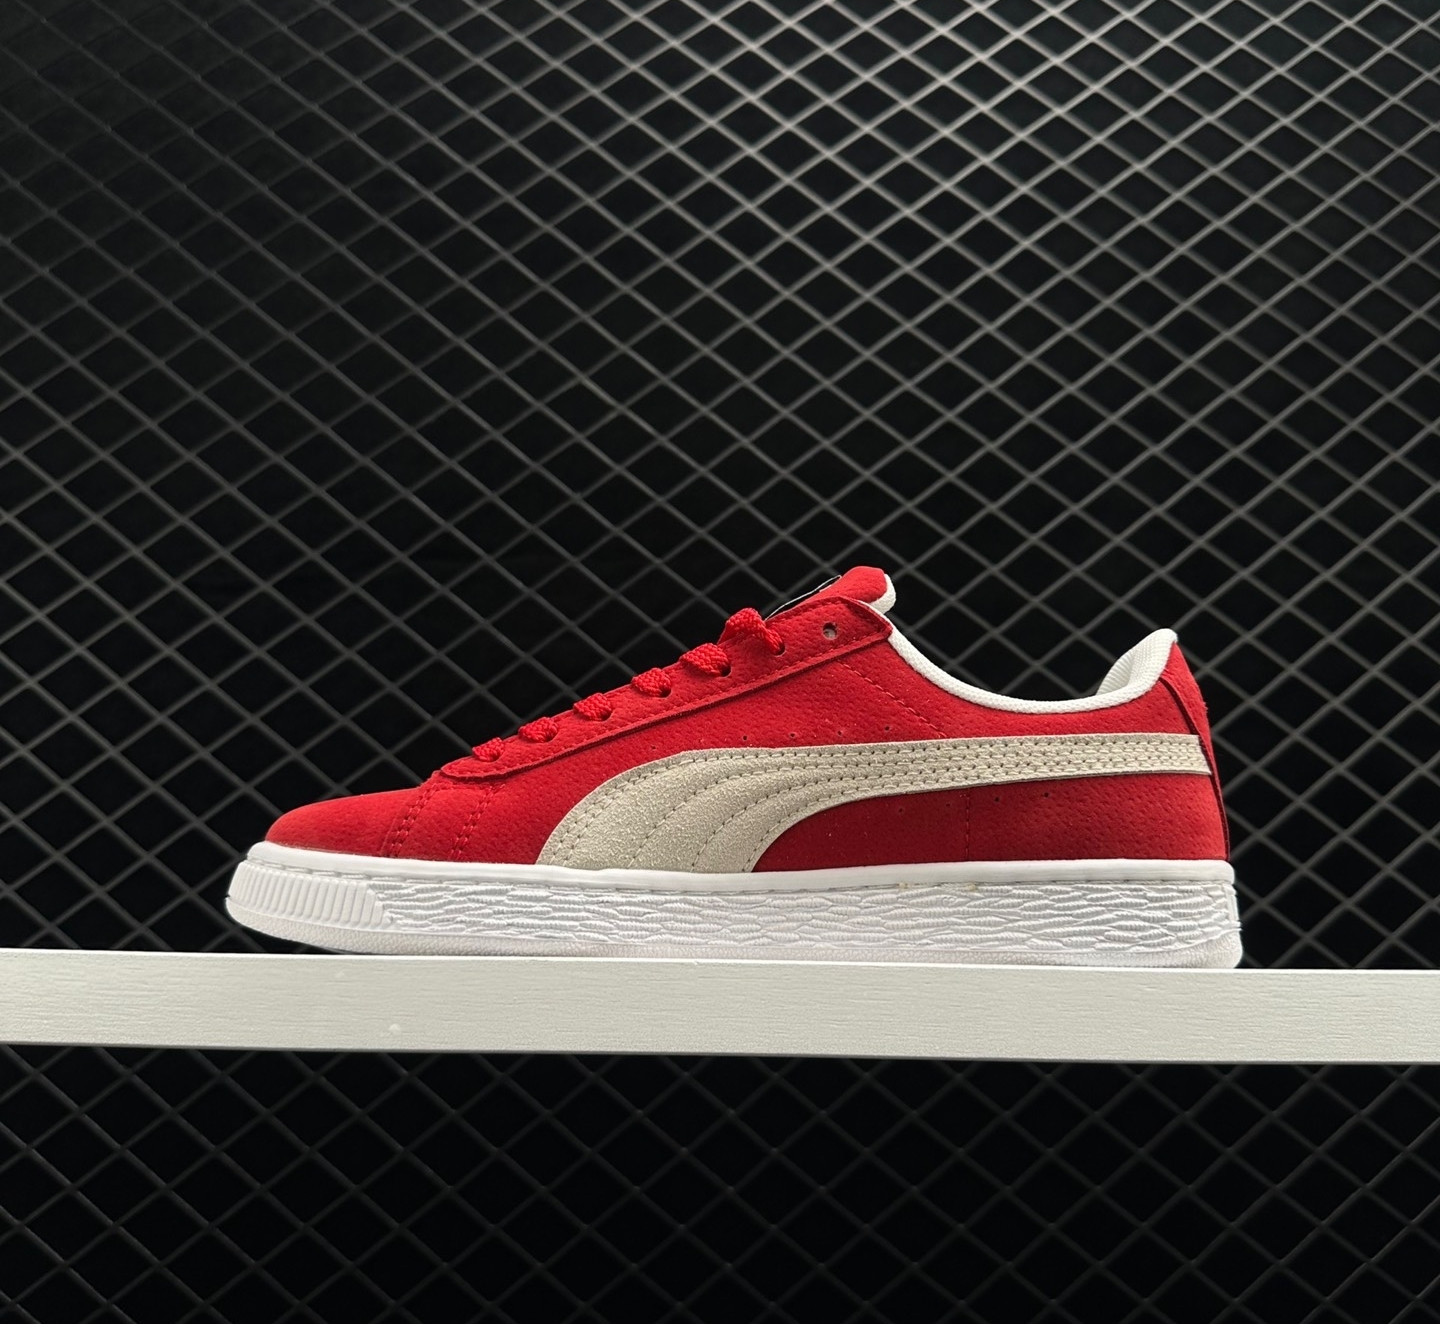 Puma Suede Classic XXI Red 374915 02 - Stylish and Timeless | Limited Stock